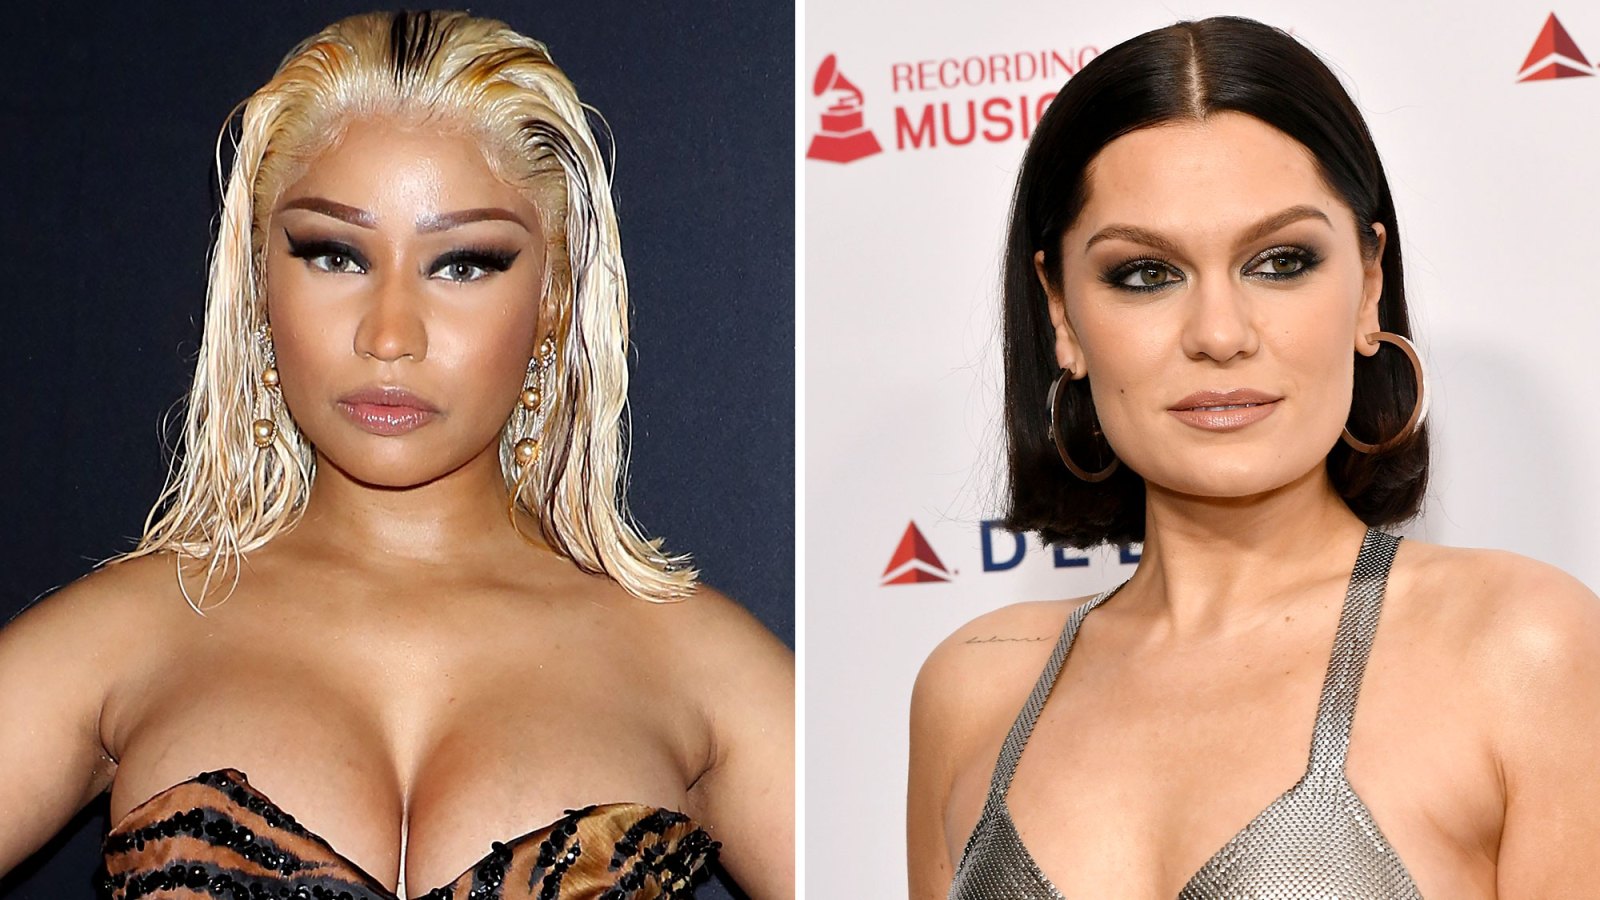 Nicki Minaj Calls Out Jessie J for ‘Bang Bang’ Comments: ‘Y’all Gotta Stop’ 